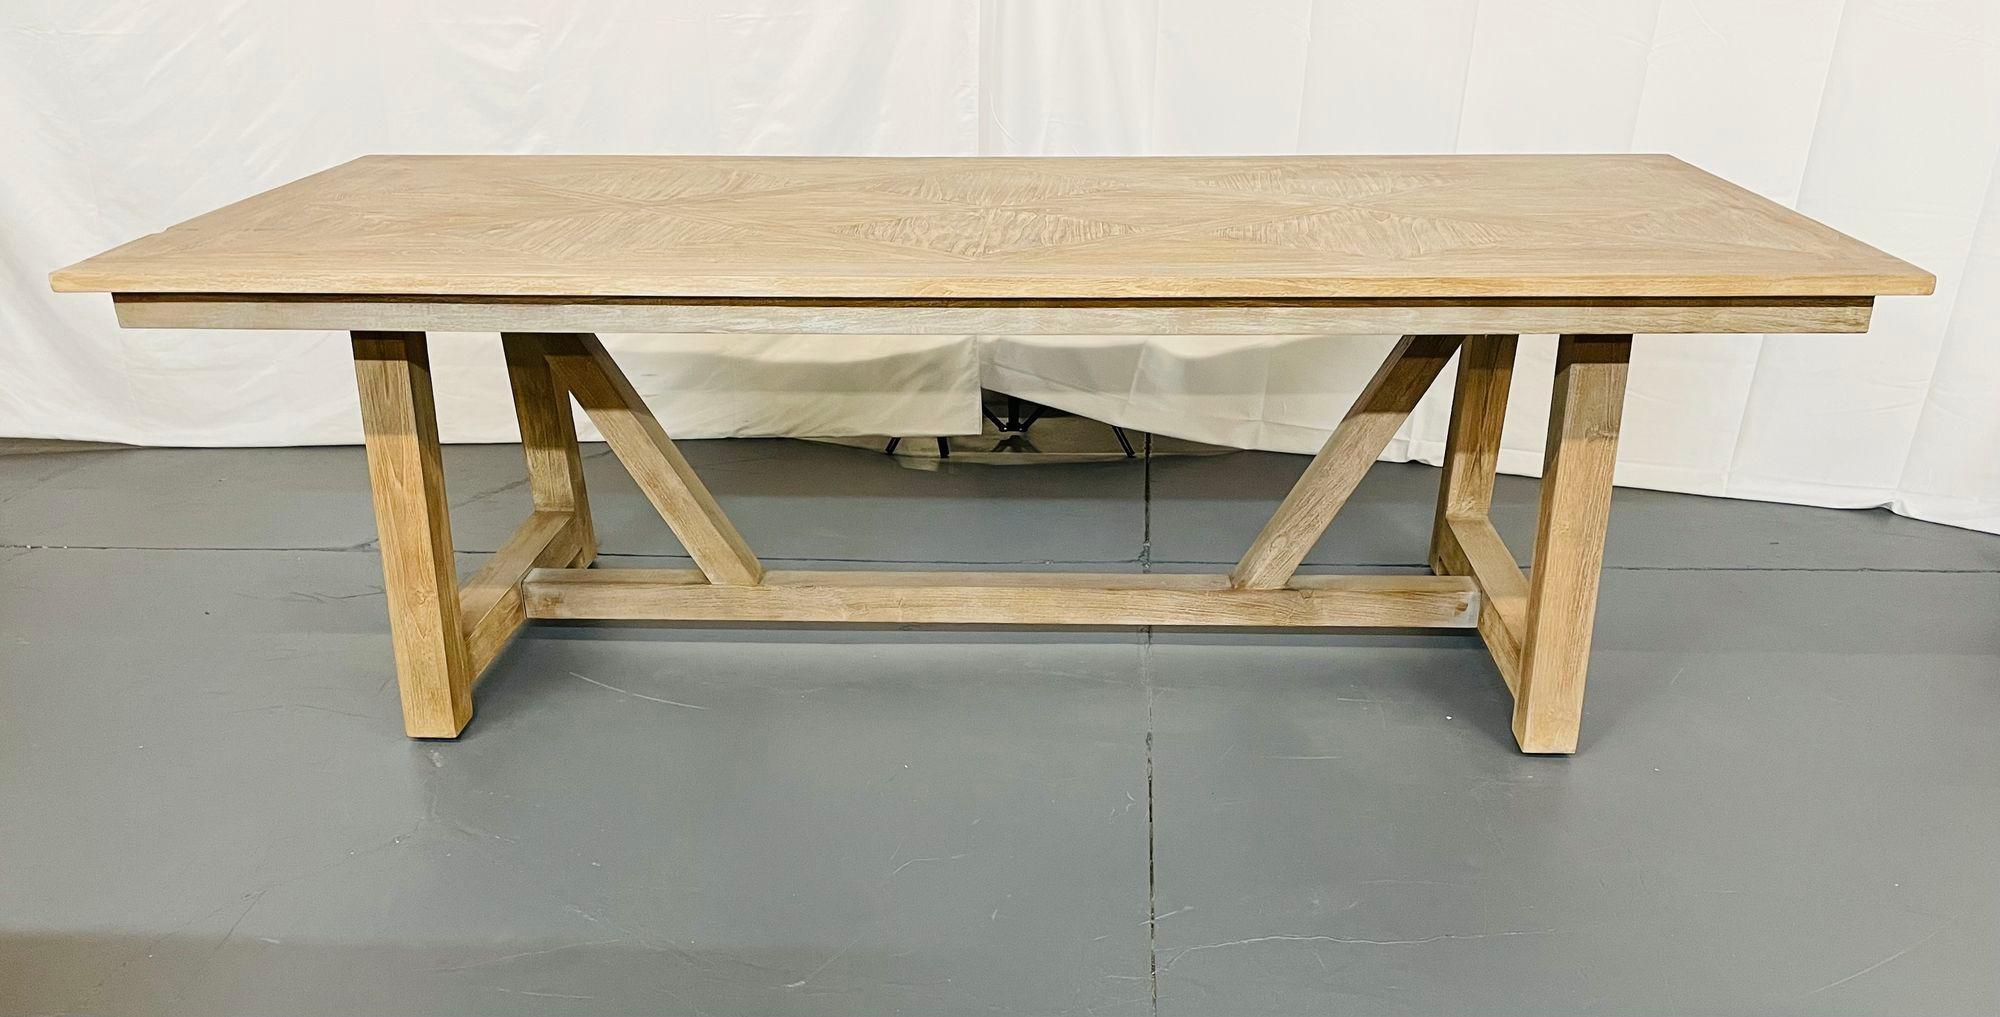 Modern farmhouse dining / kitchen / conference table, ceruse oak finish.
Midcentury inspired French country style dining table designed and produced in 2015. This farmhouse table is finished with a beautiful ceruse oak or pickled wood veneer with a